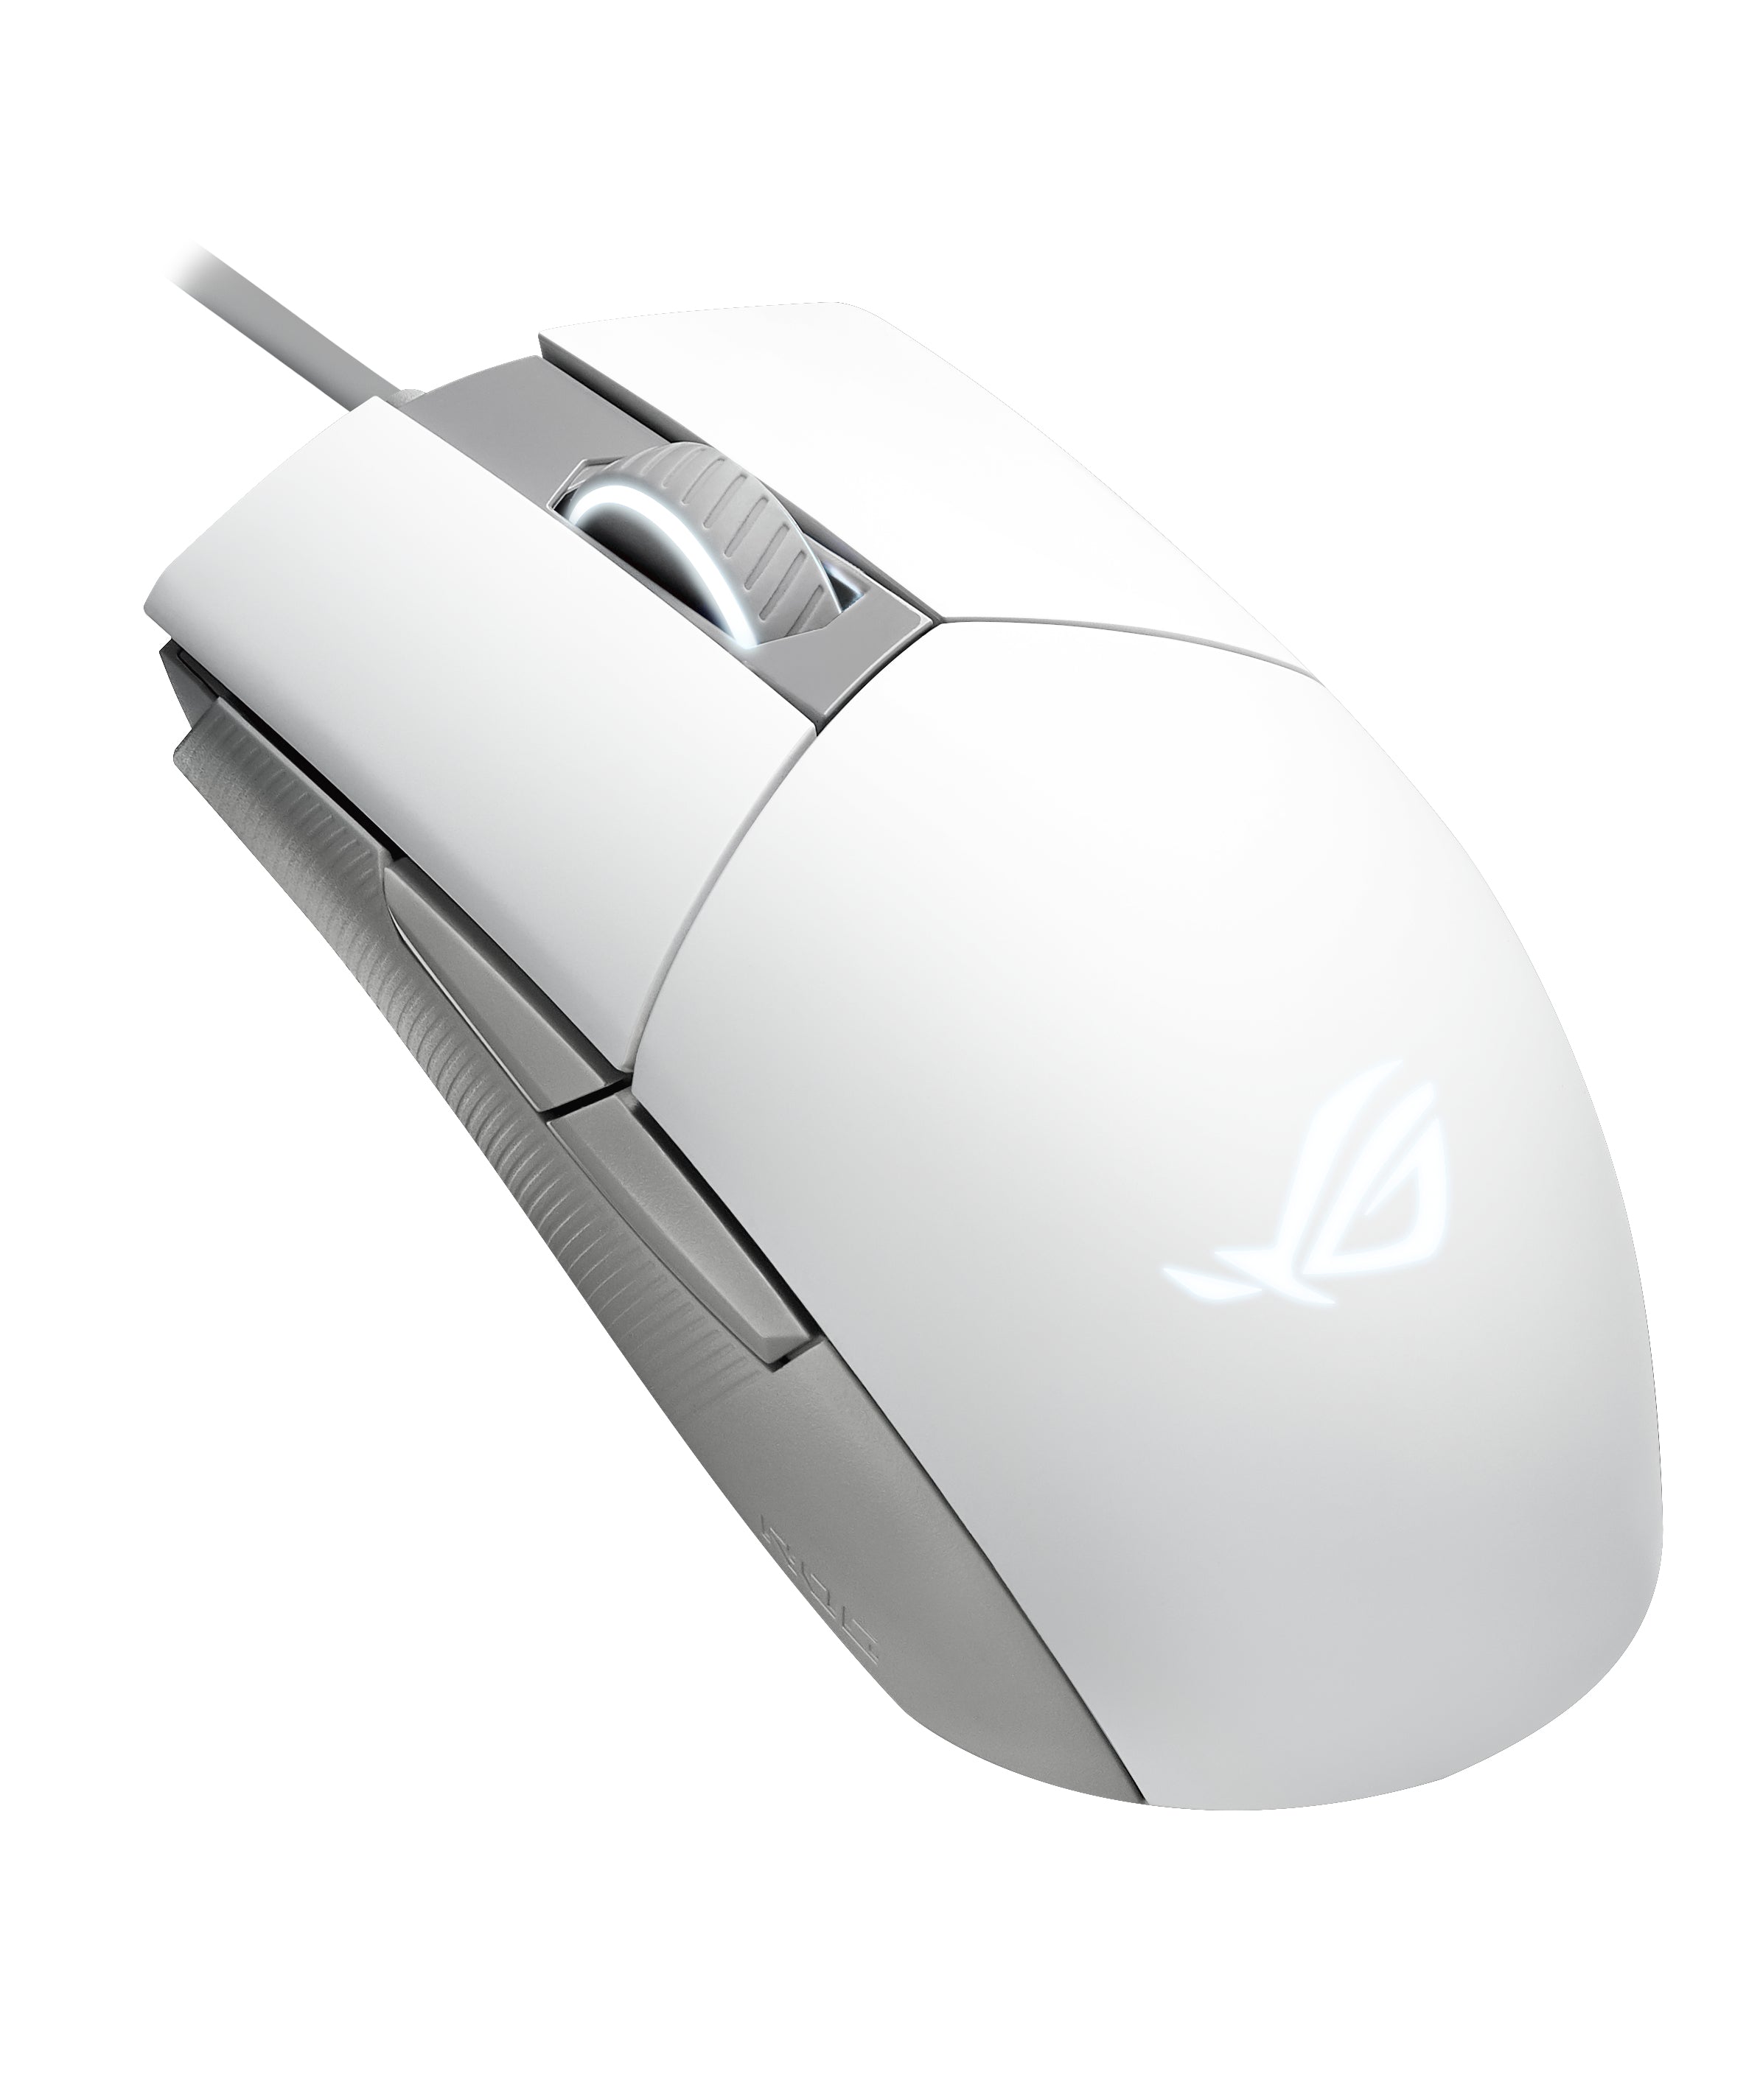 ASUS ROG STRIX Impact II MOONLIGHT WHITE Edition Gaming Mouse